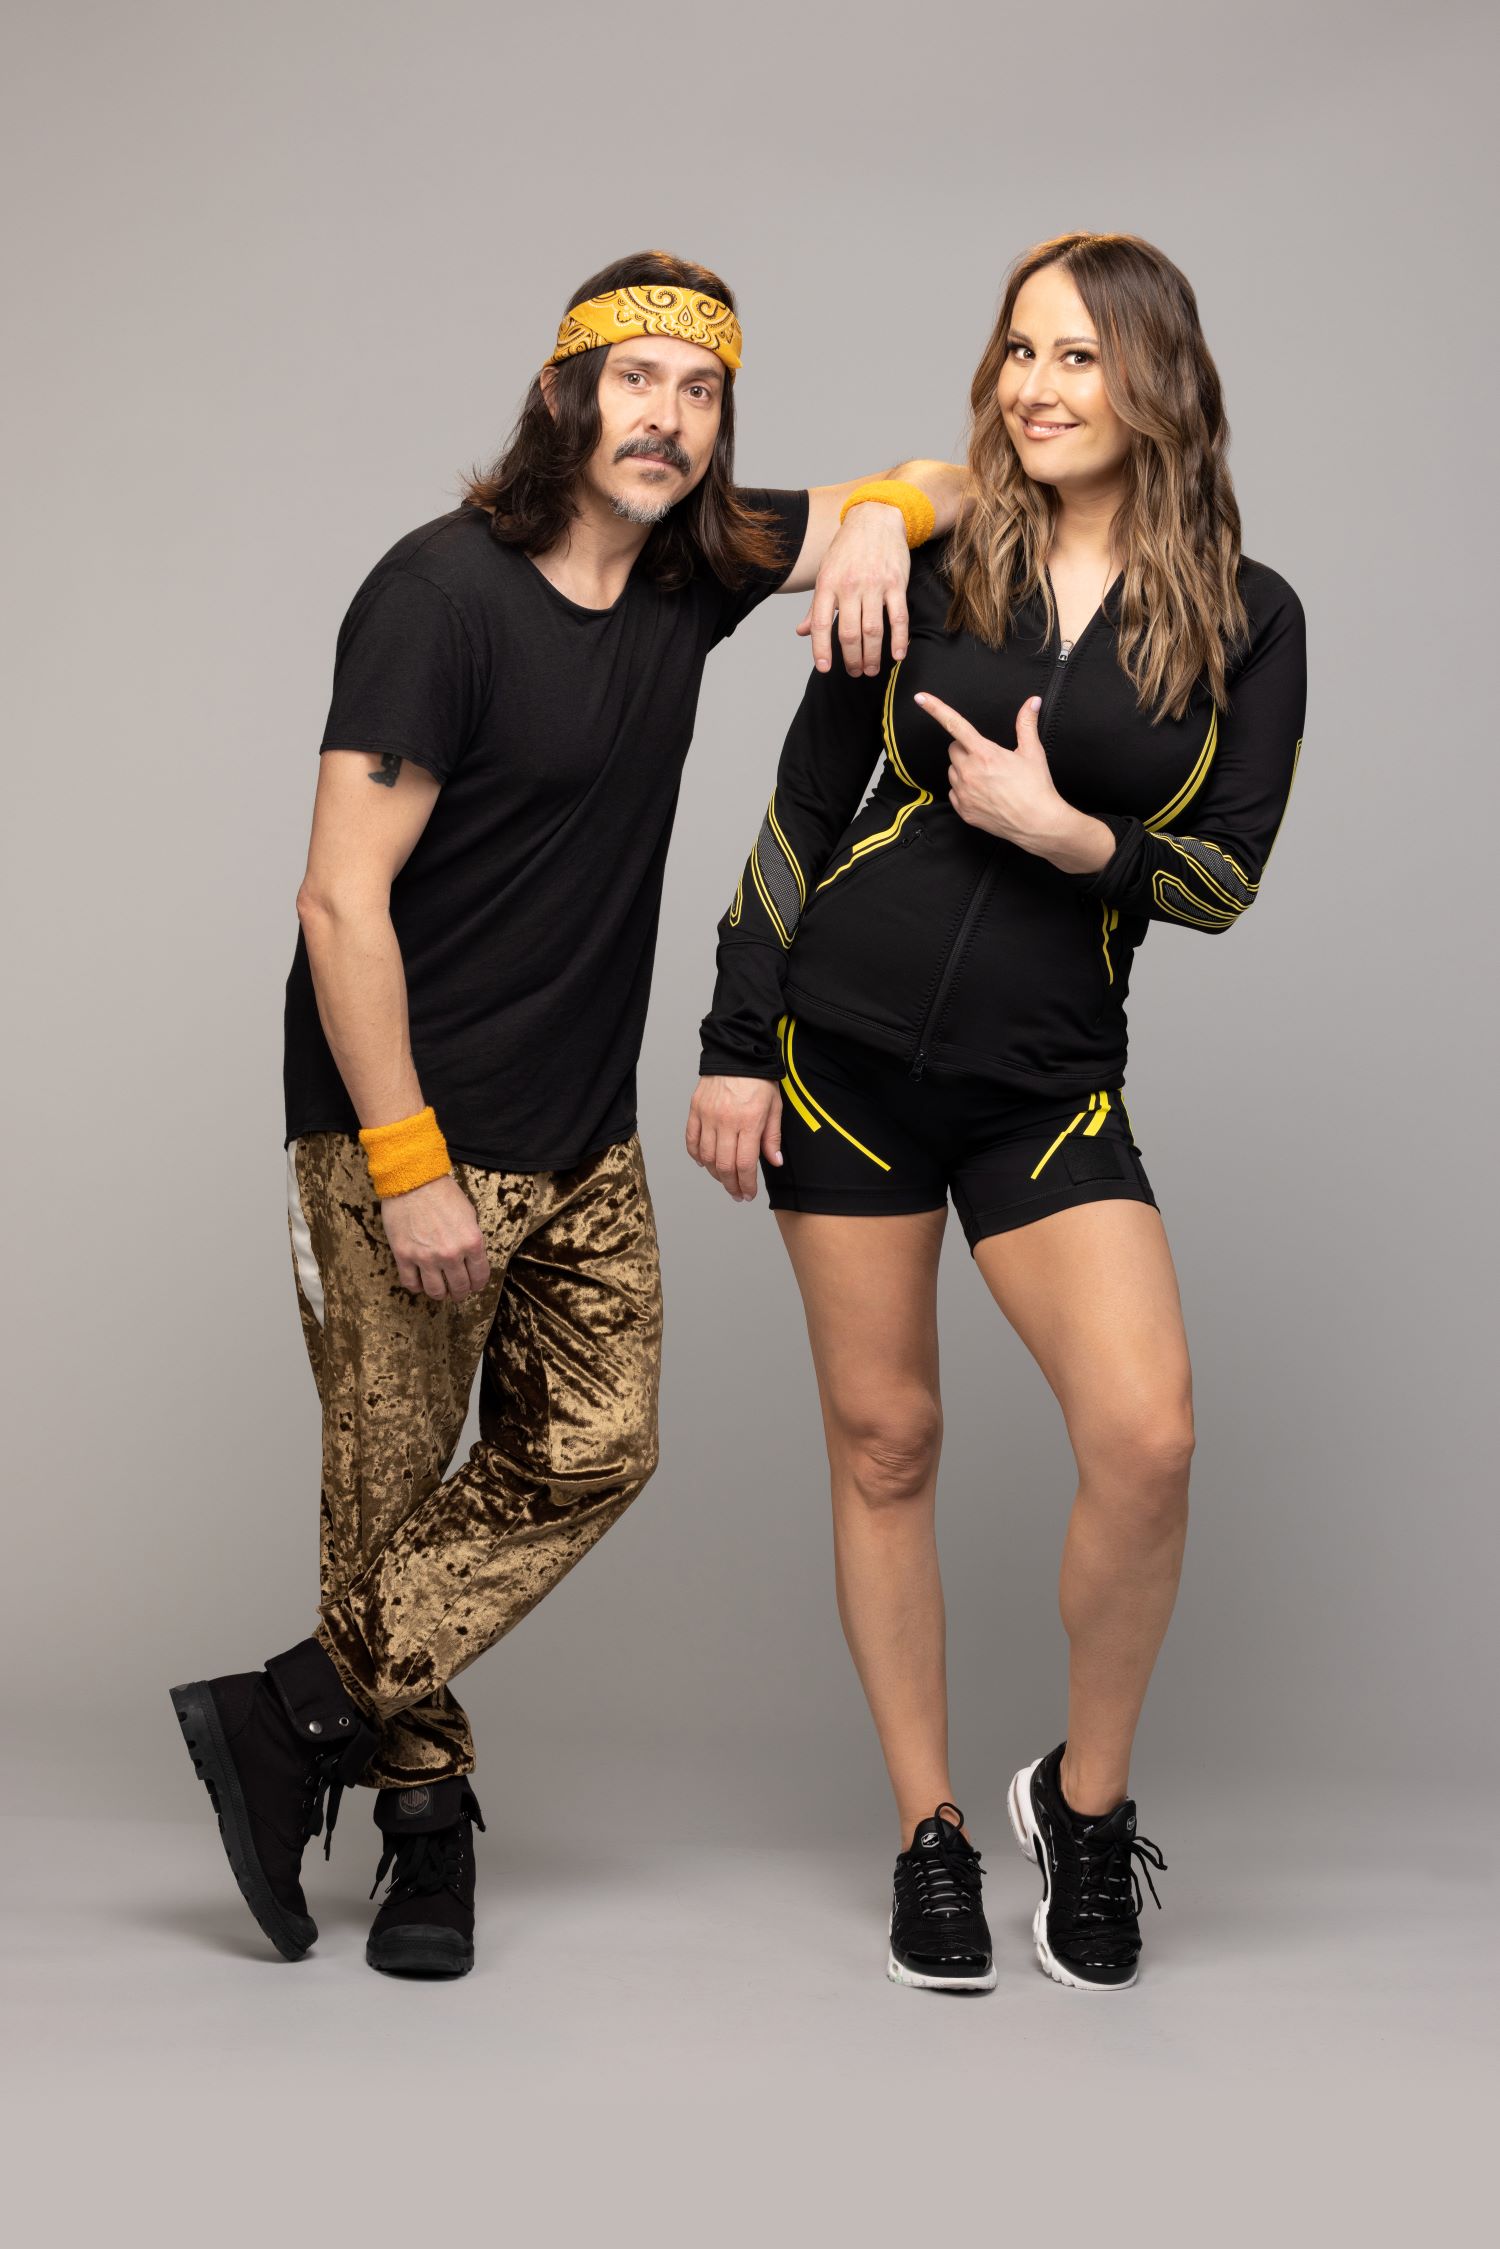 The Amazing Race Australia 2023 Celebrity Edition Jackie Gillies and husband Ben Gillies